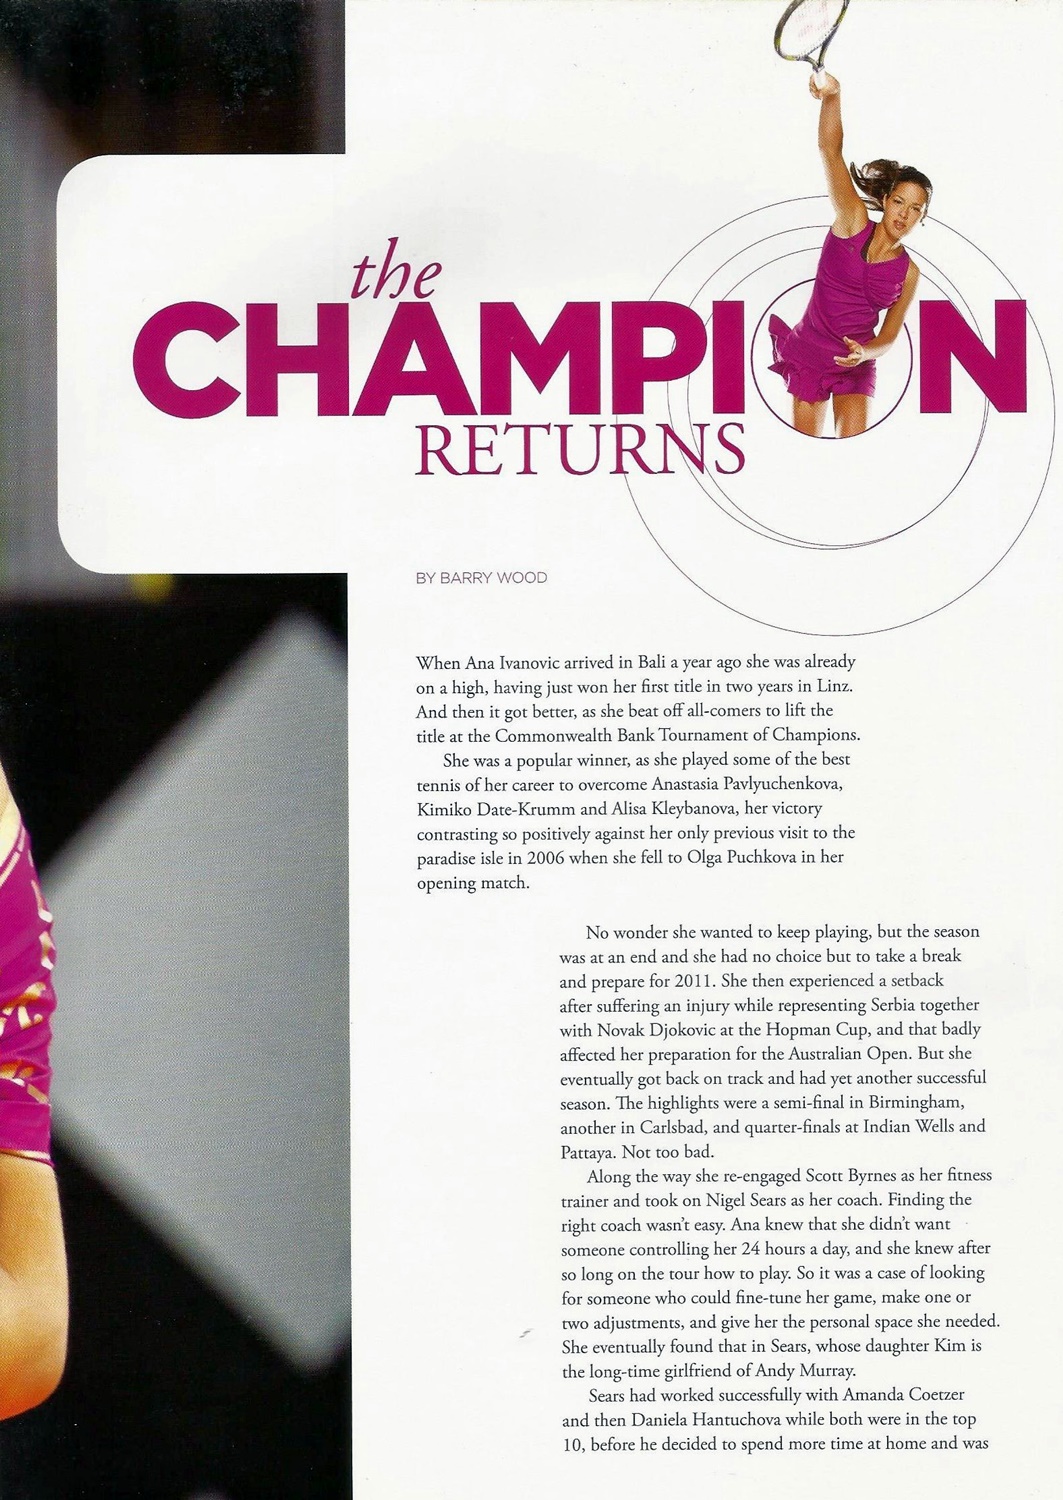 The Champion returns #1 by Barry Wood